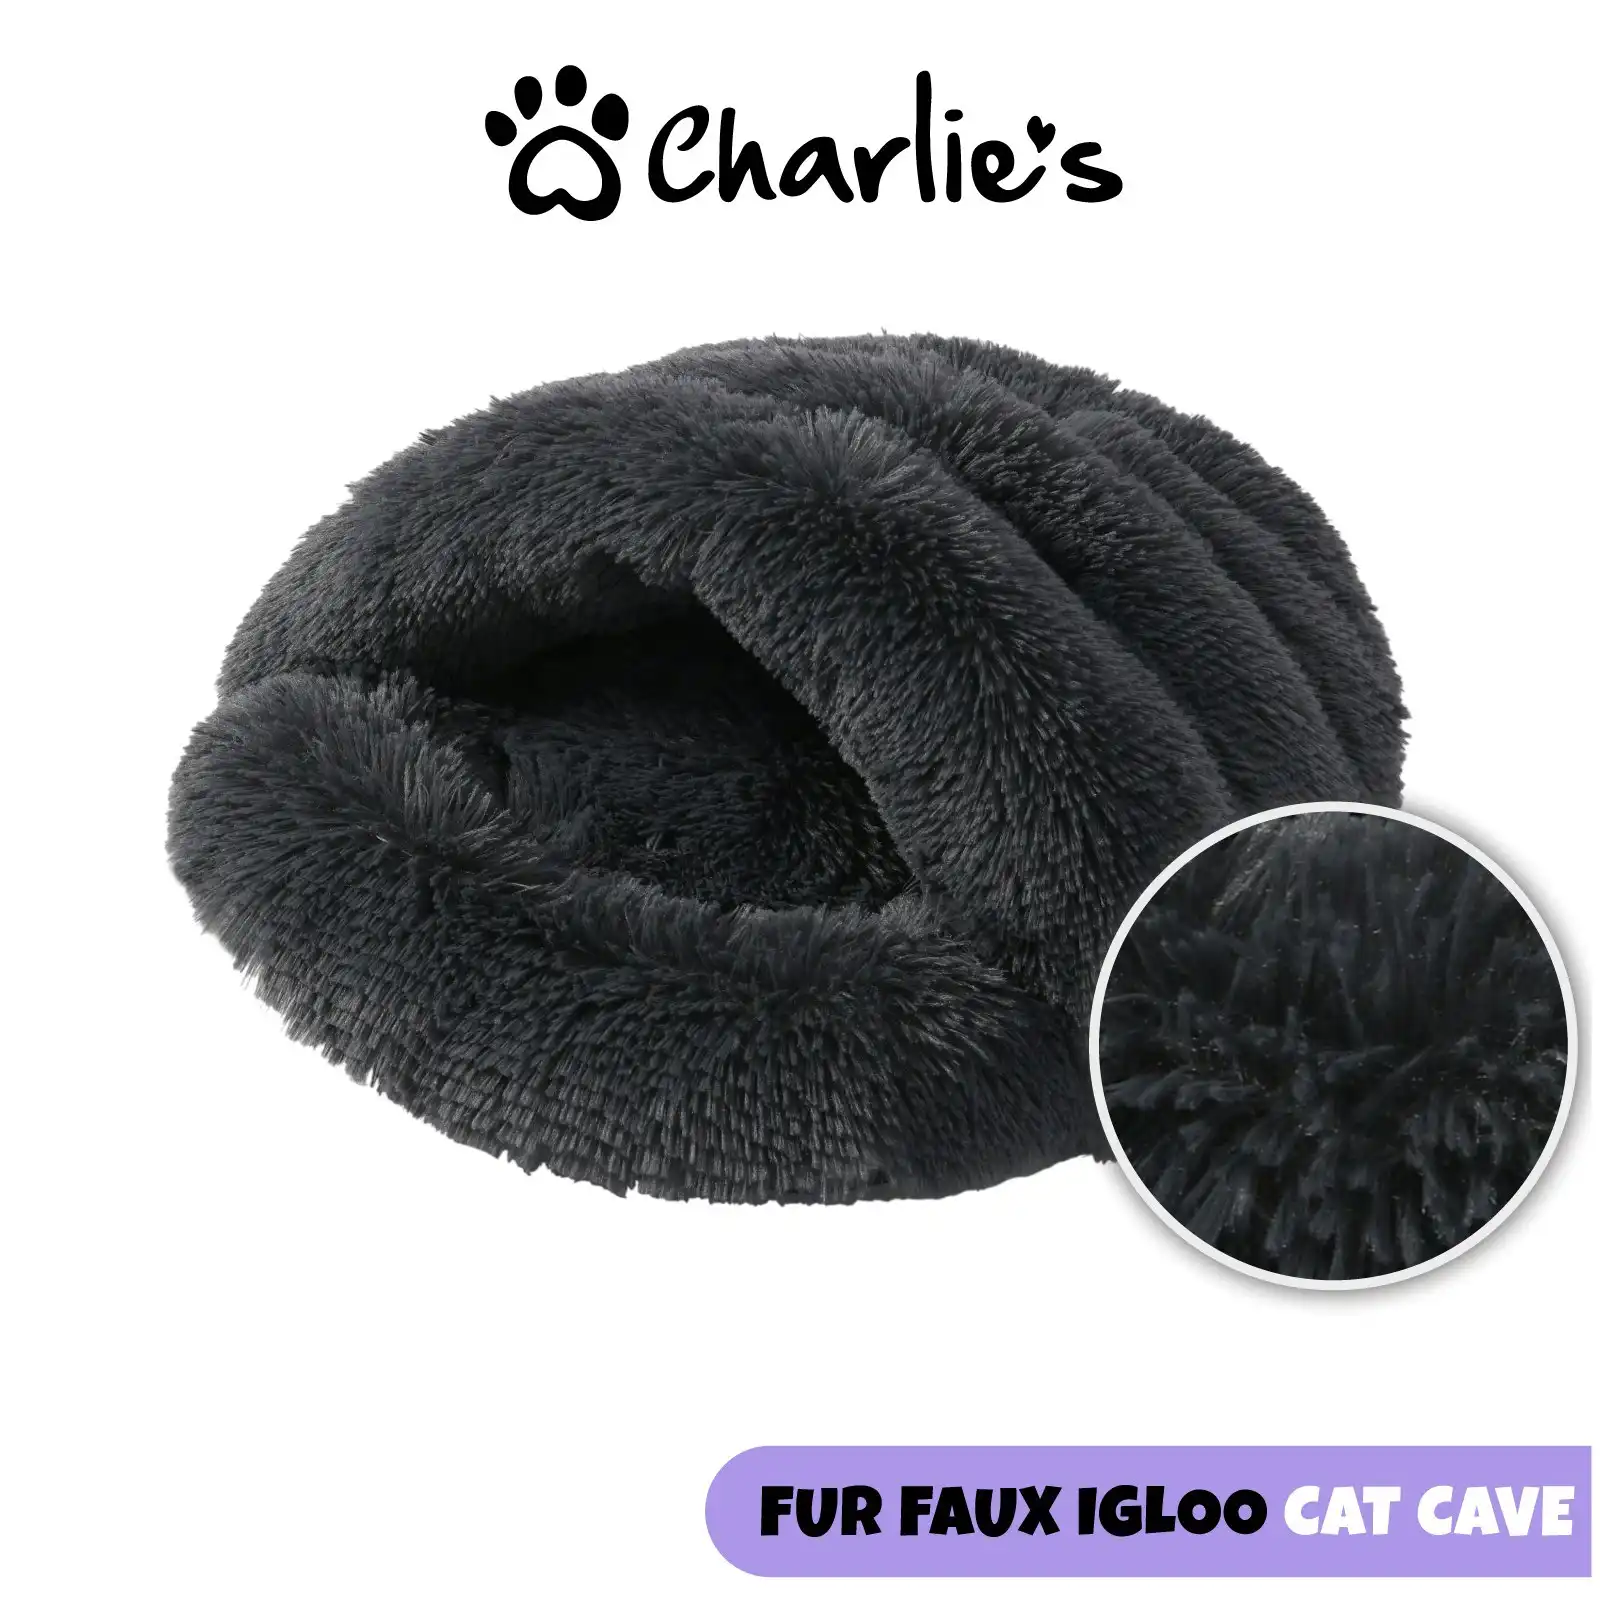 Charlie's Shaggy Fur Faux Igloo Cat Cave Bed Charcoal 60x50cm